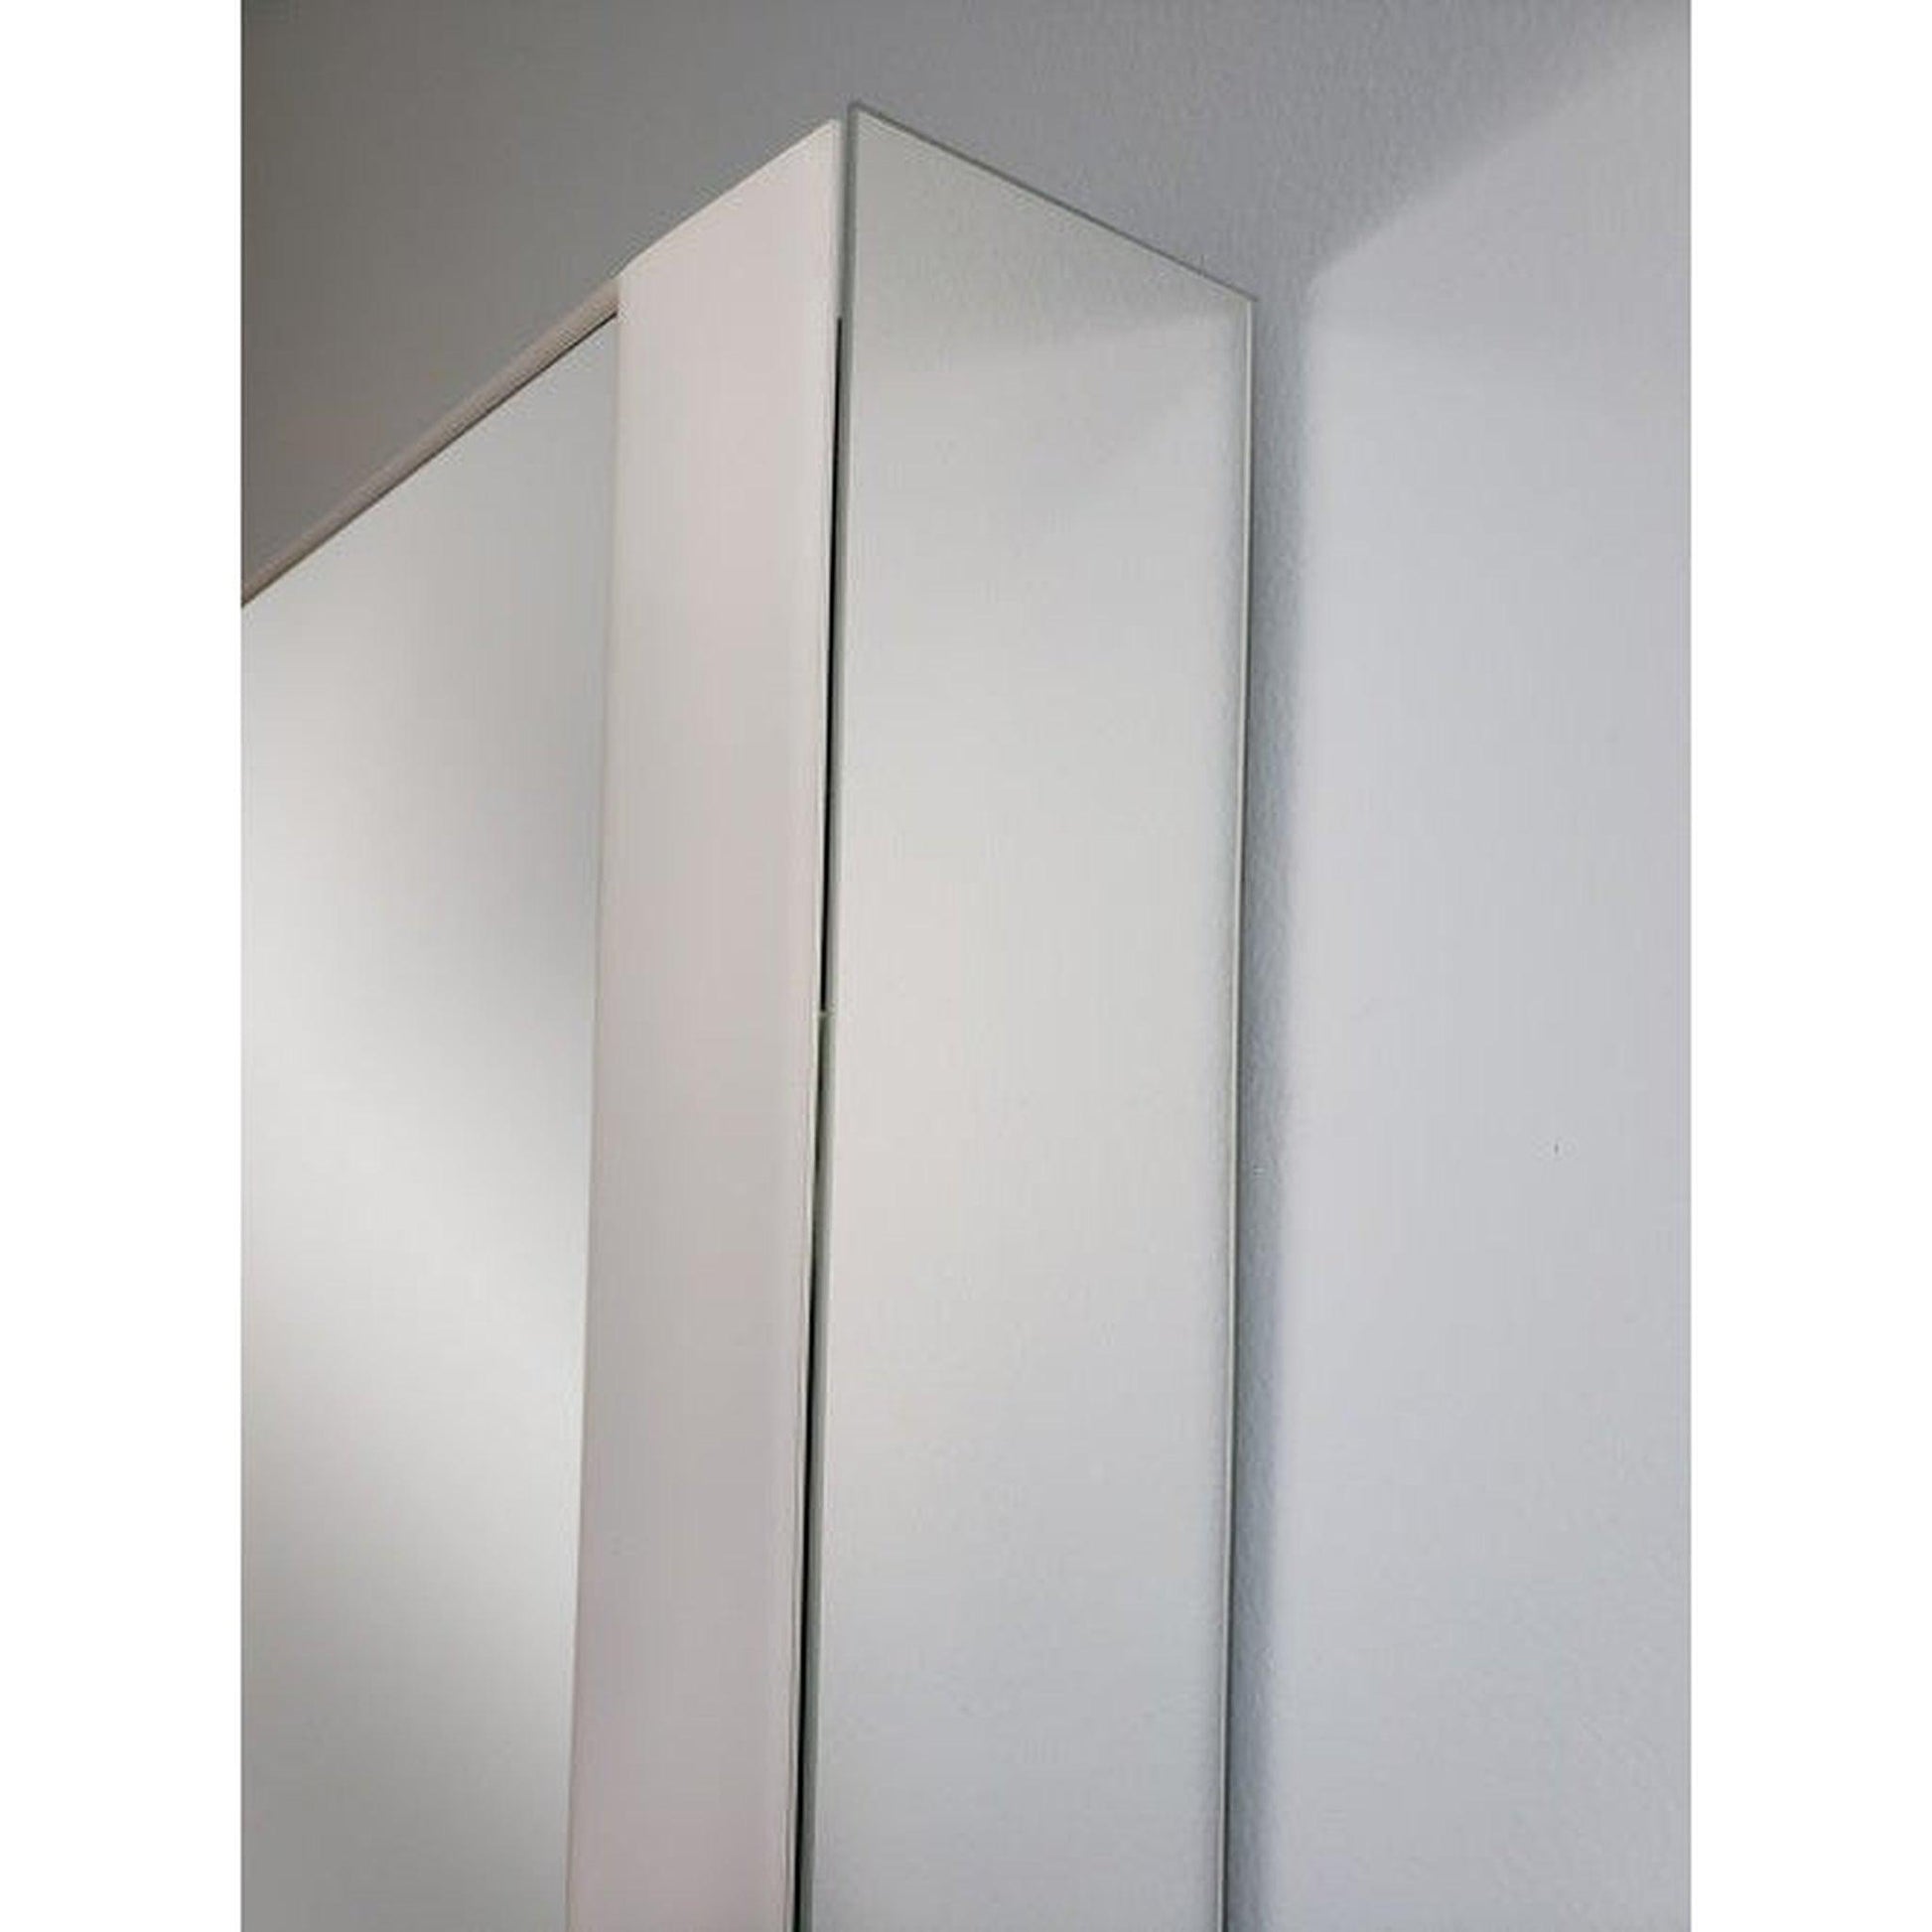 Sidler Quadro 24" x 36" 3000K Single Right Hinged Mirror Door Anodized Aluminum Medicine Cabinet With Night Light Function, Built-in GFCI Outlet and USB port